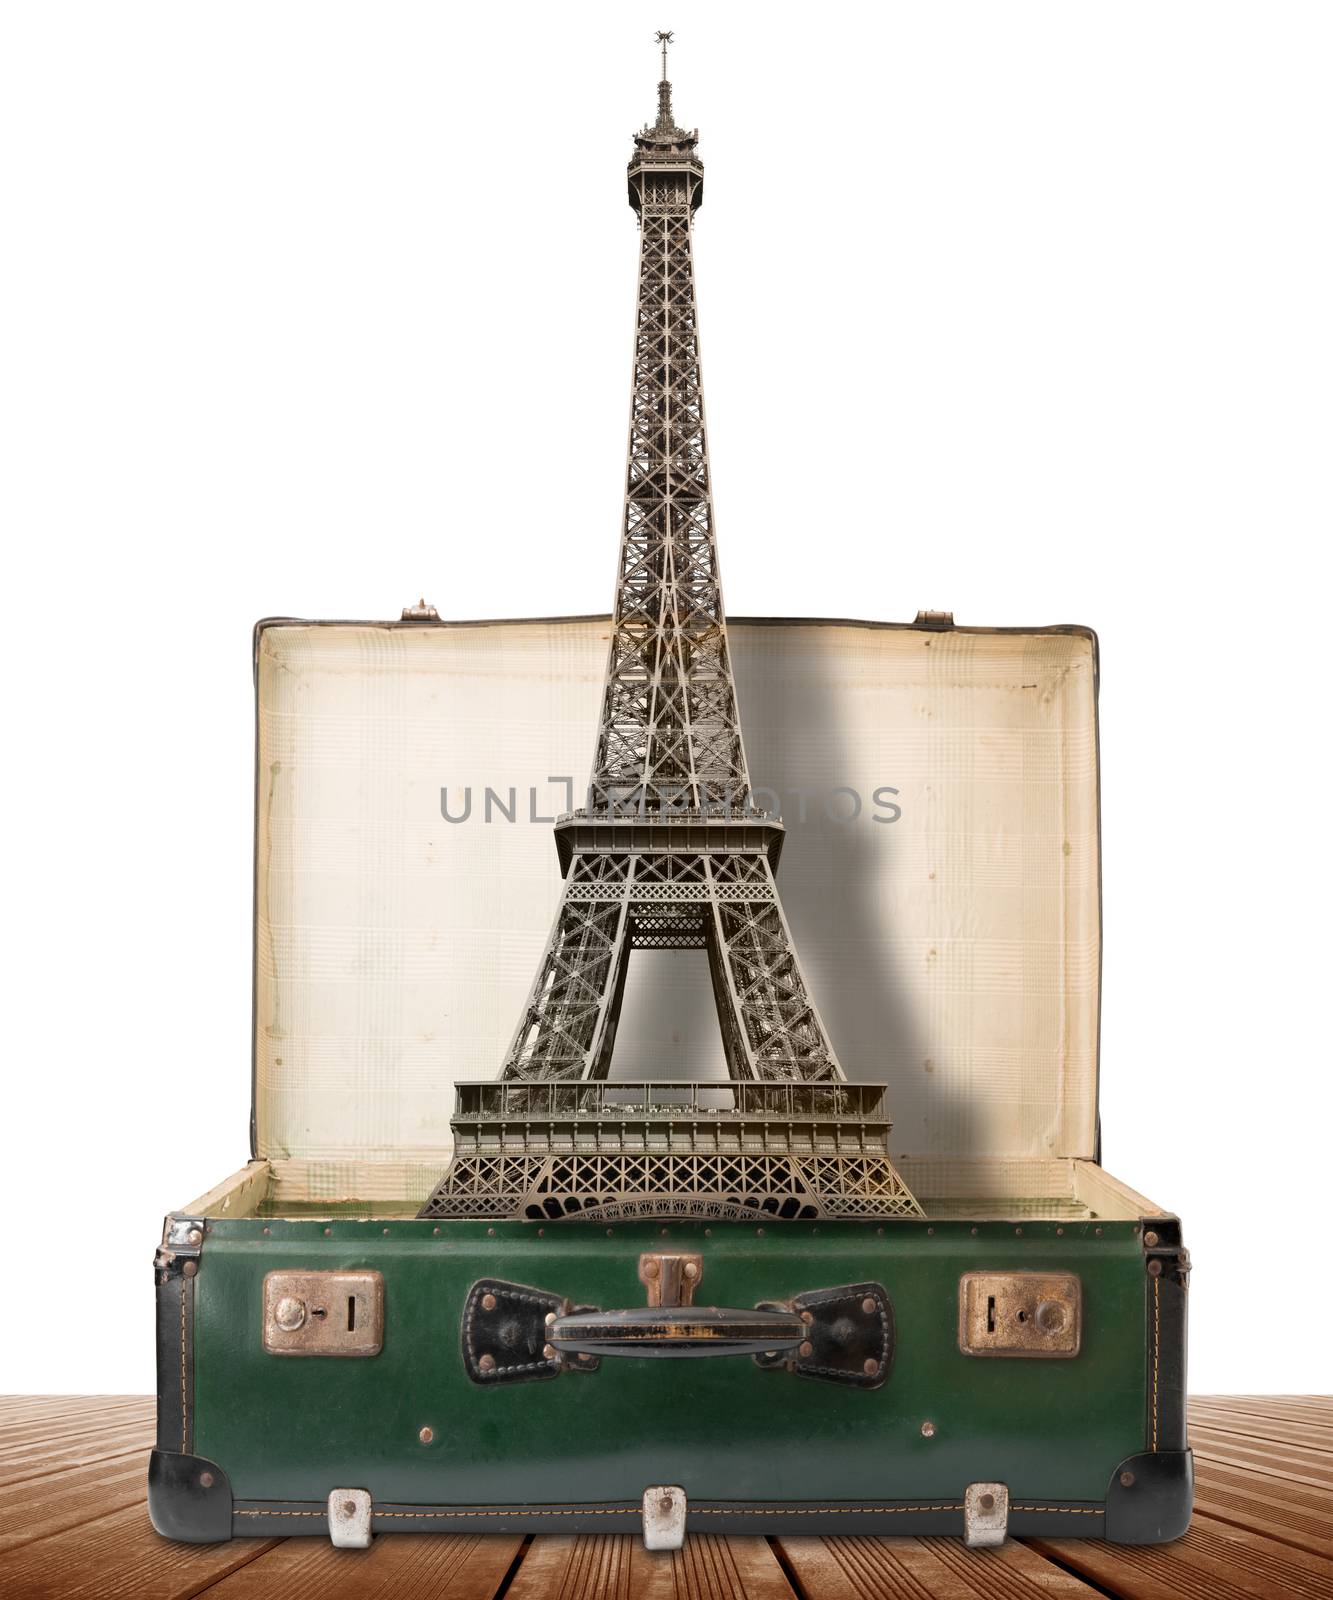 the Eiffel Tower in a suitcase